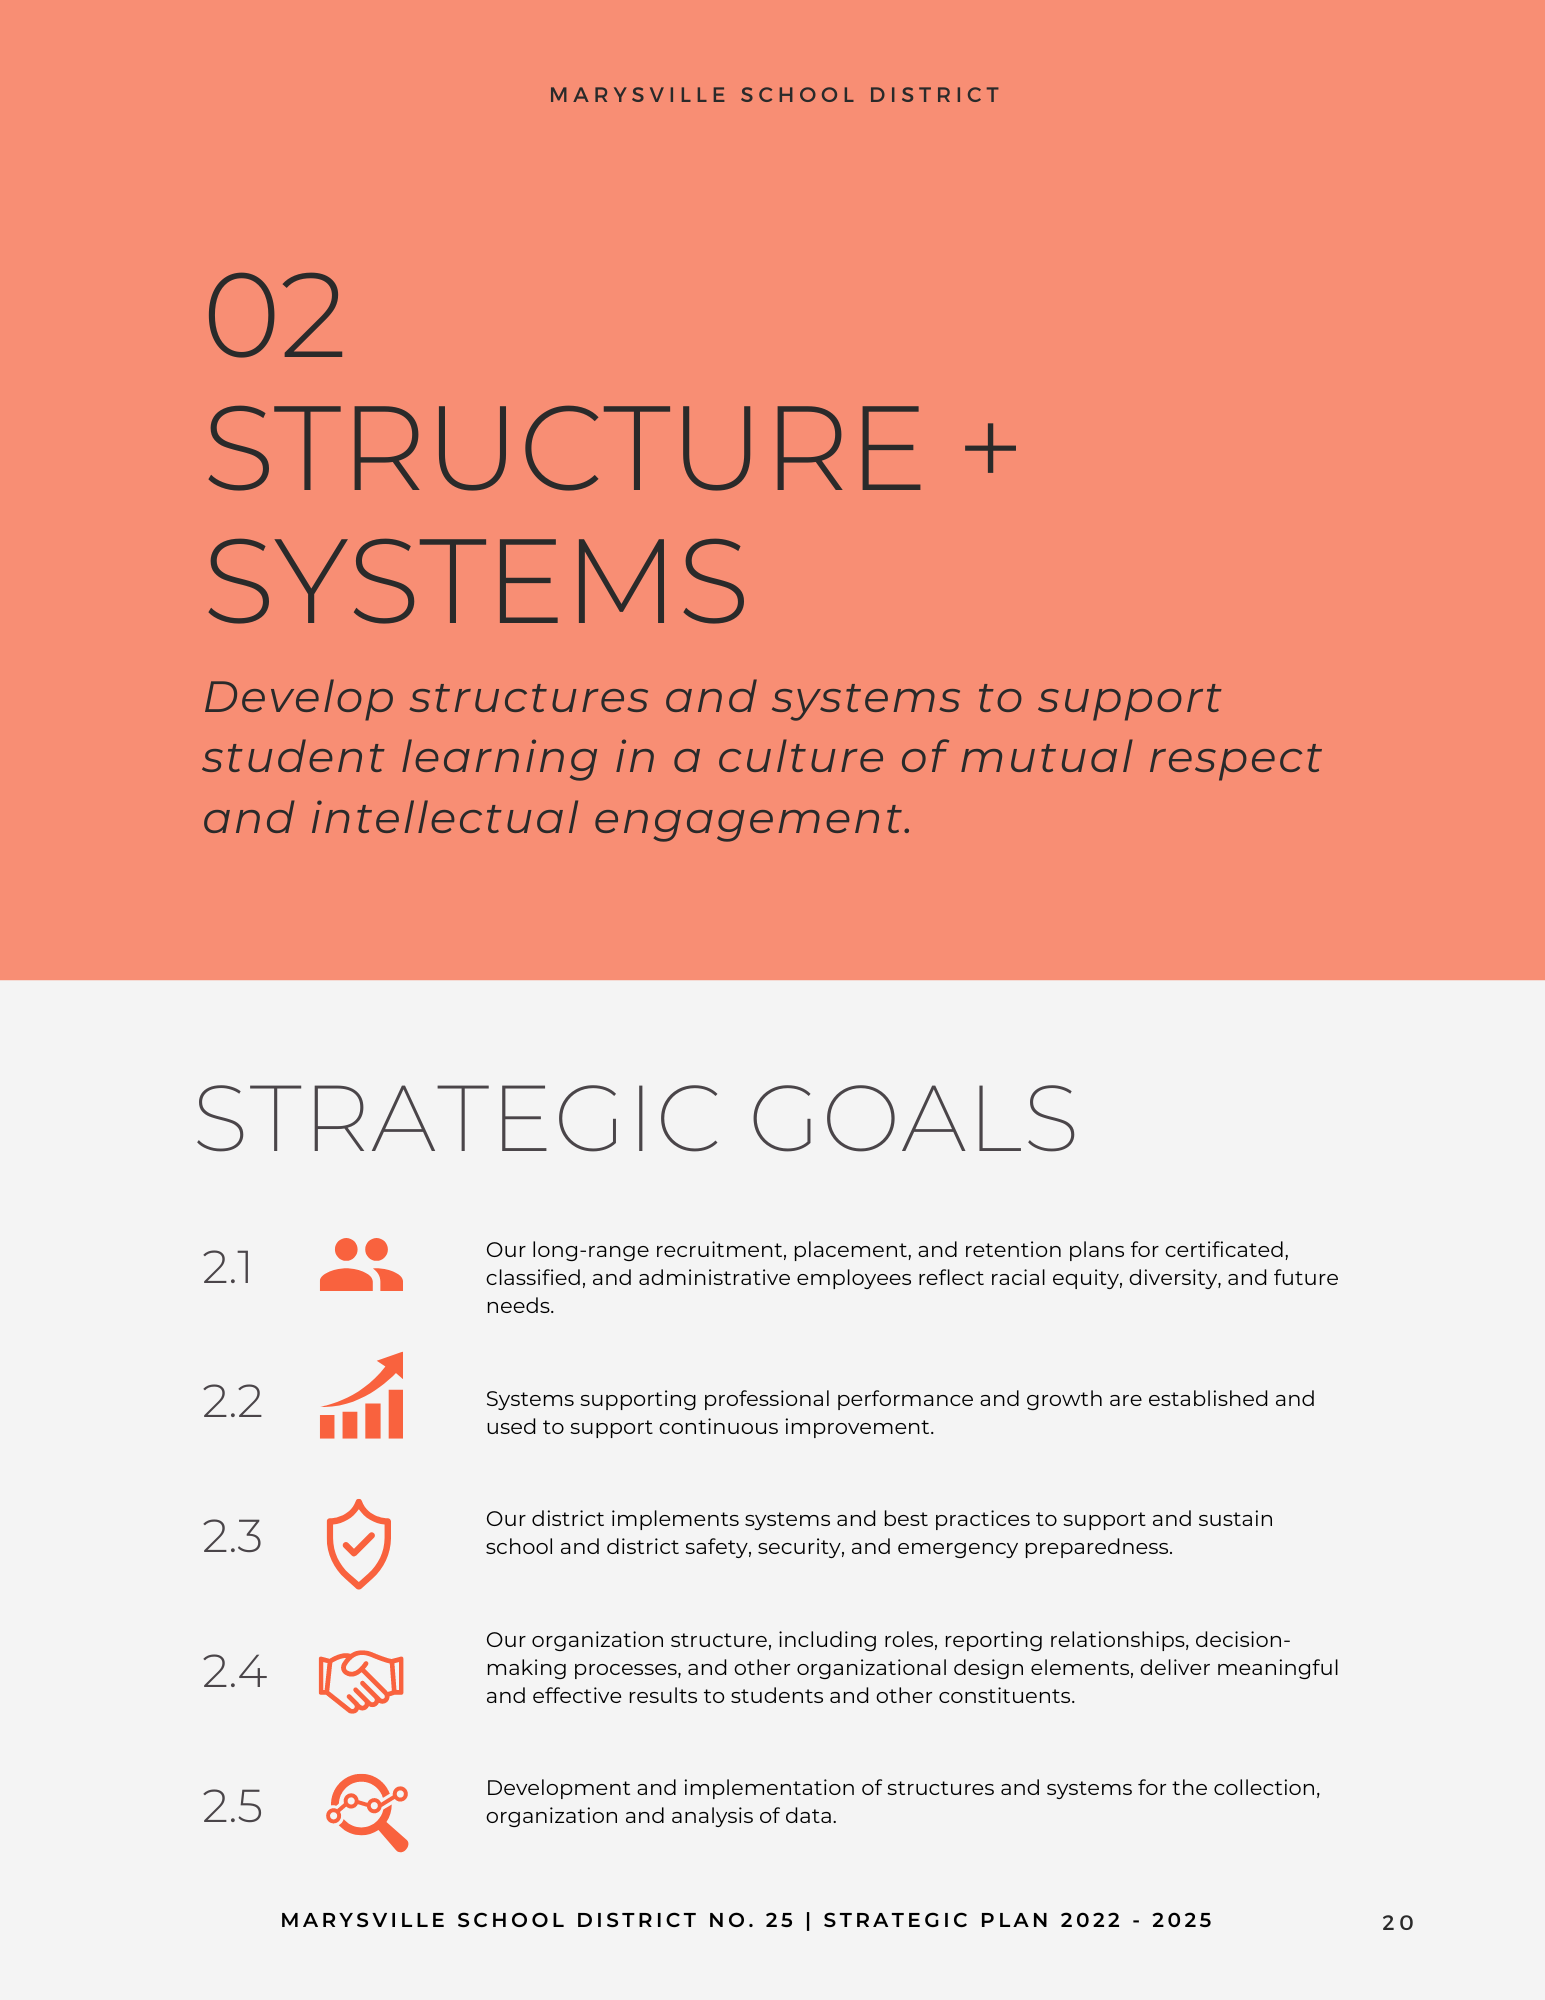 02 Structures and Systems